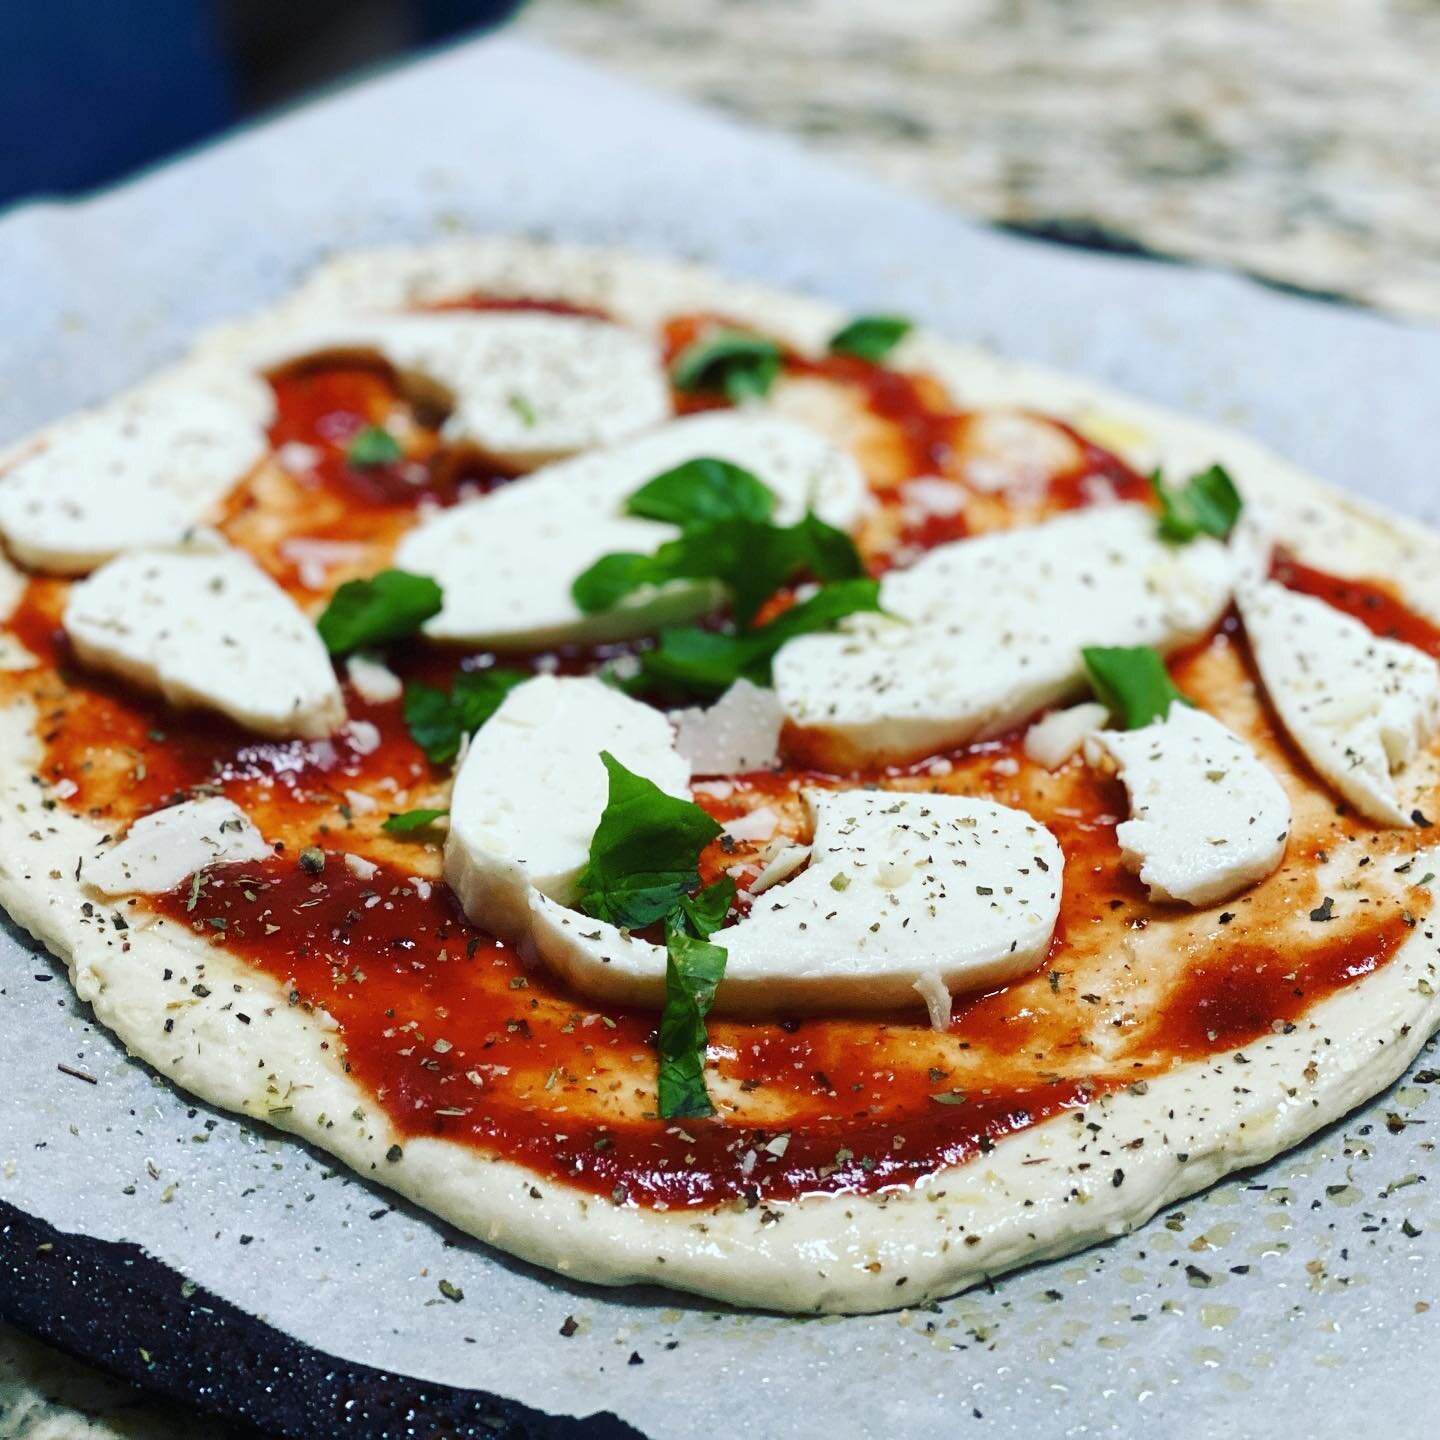 I&rsquo;ve been making homemade sourdough pizza for a while now. I think this one&rsquo;s going to be pretty good #pizzalovers #sourdoughpizza #pizzamargherita